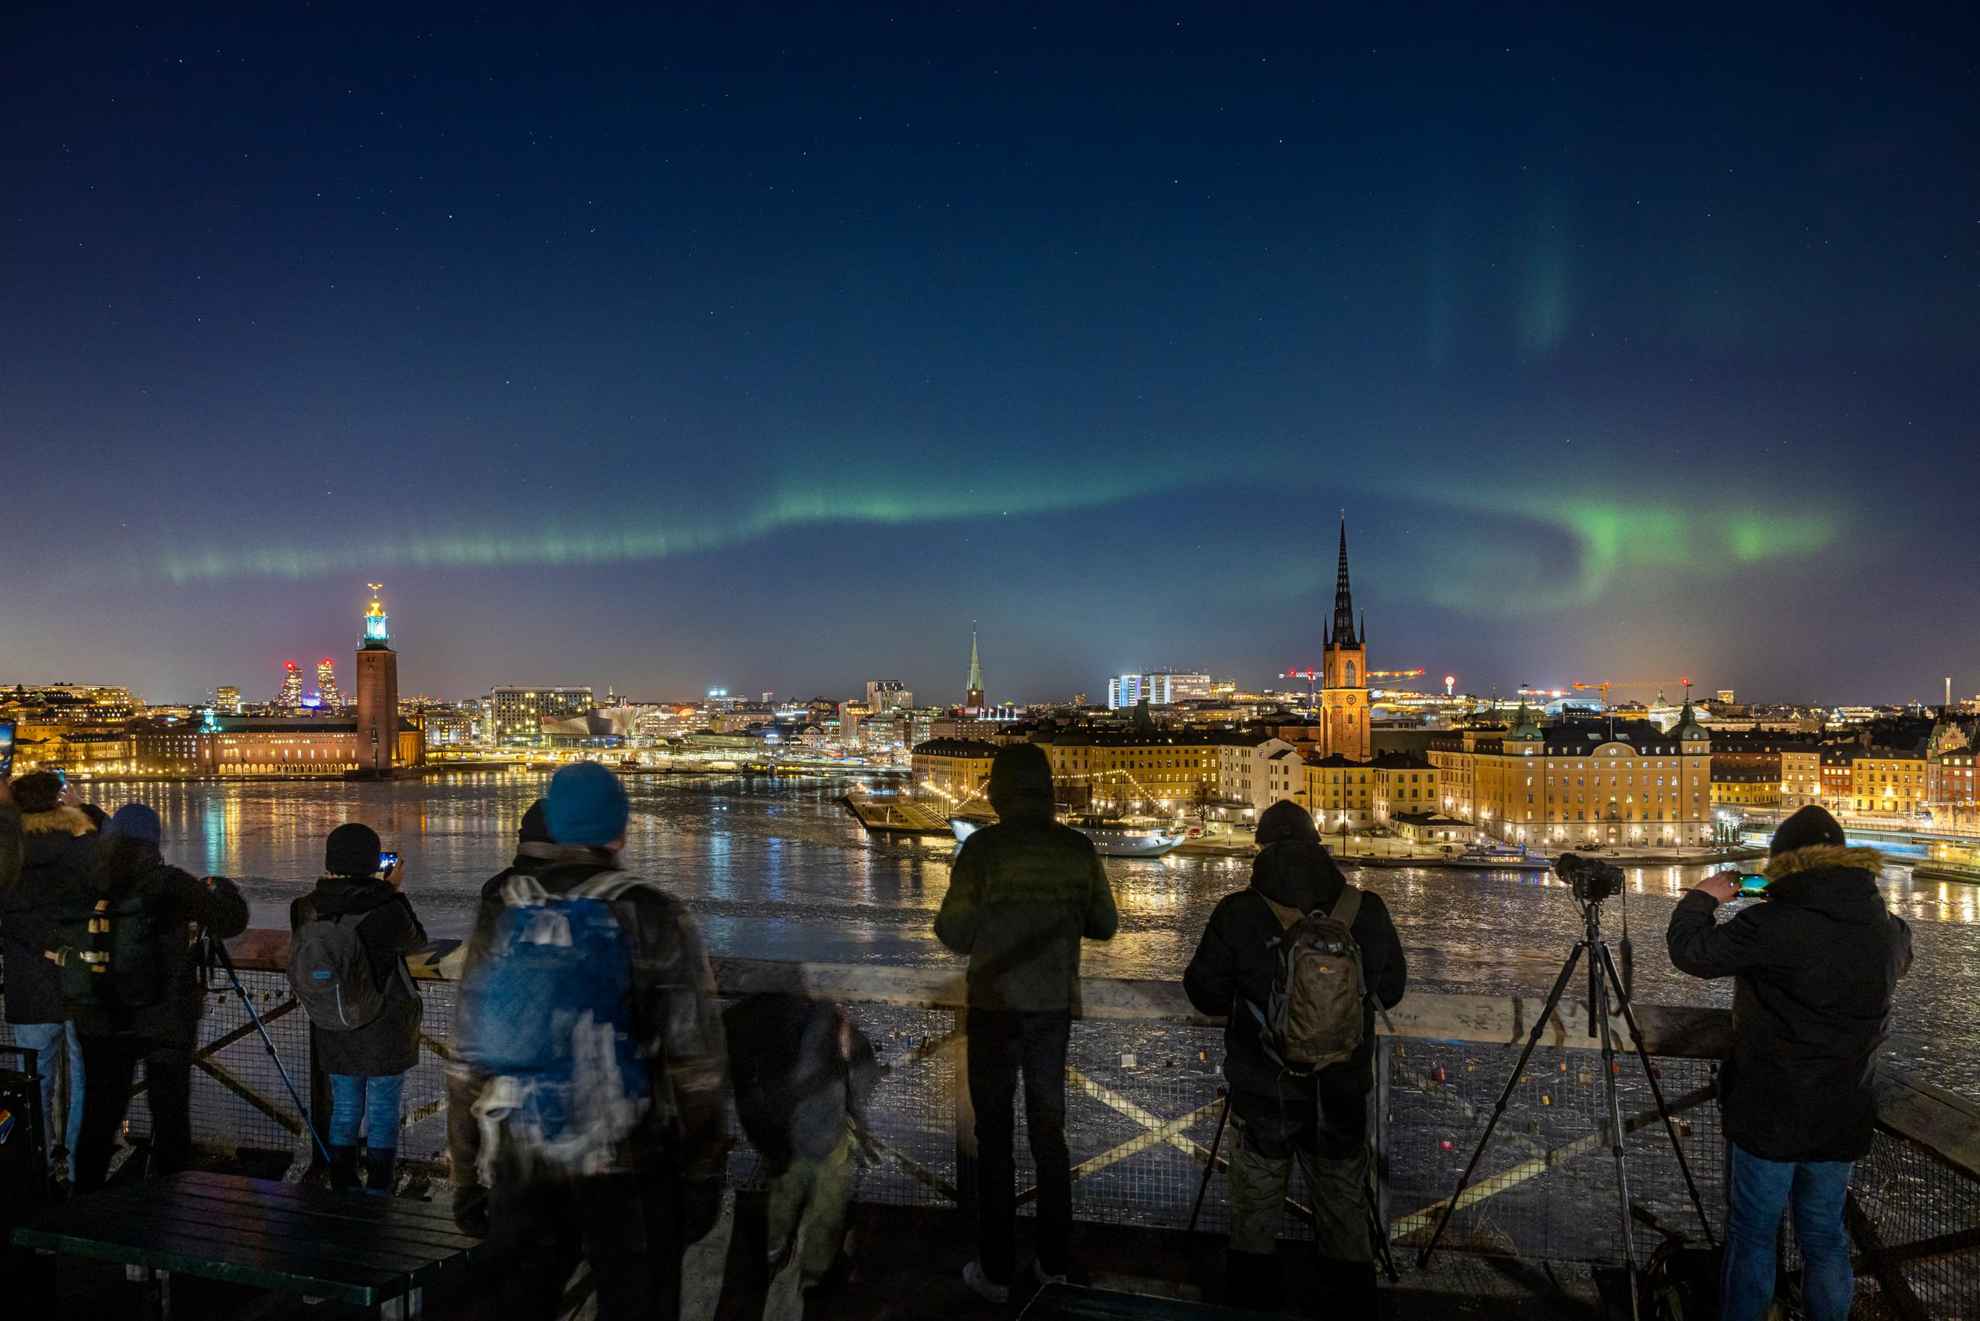 Northern lights over a city landscape, with photographers lined up to get a shot.